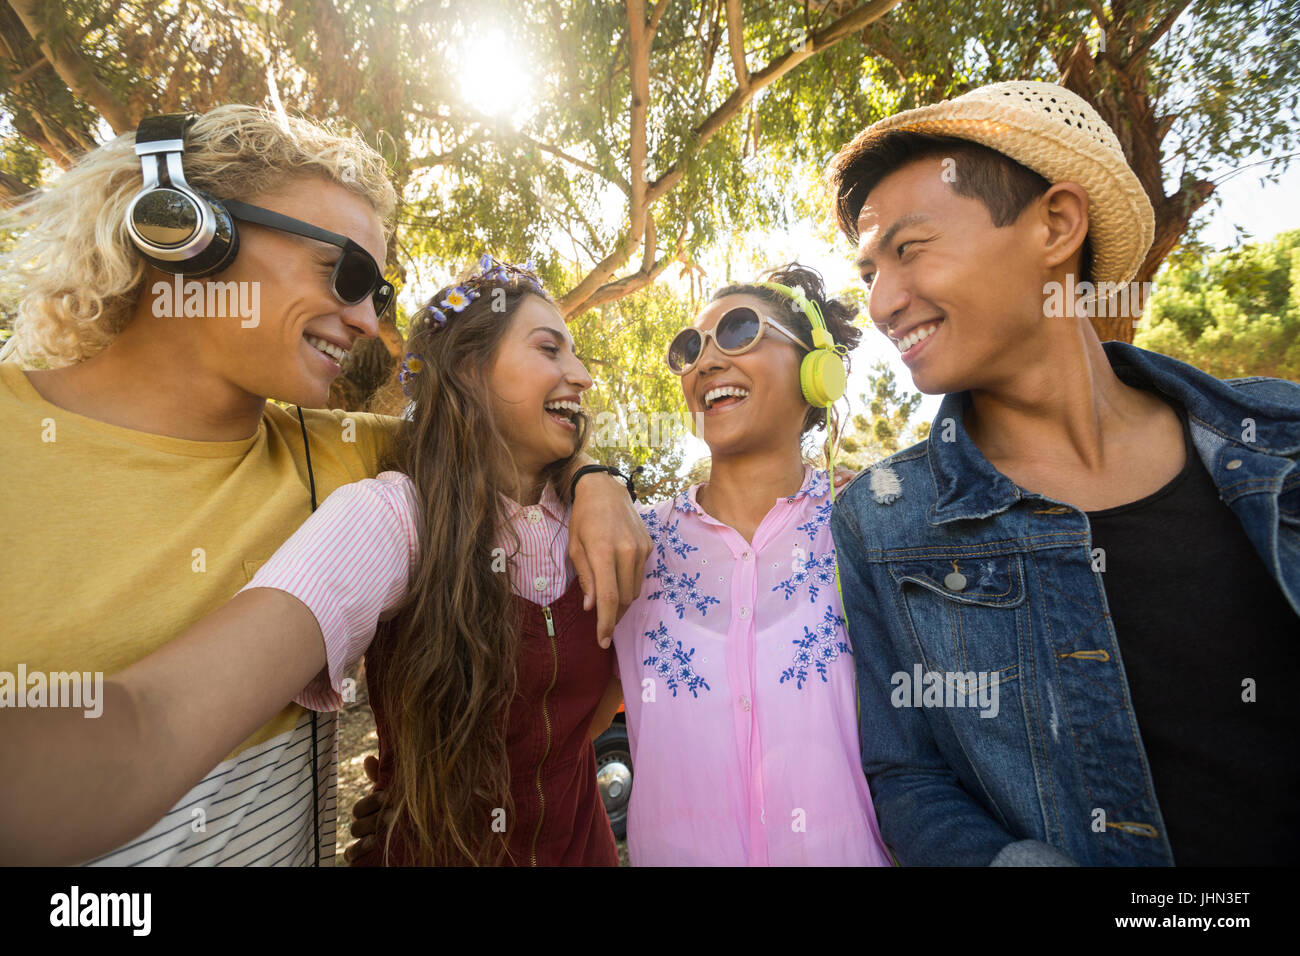 Close-up of smiling friends standing side by side against trees on sunny day Stock Photo